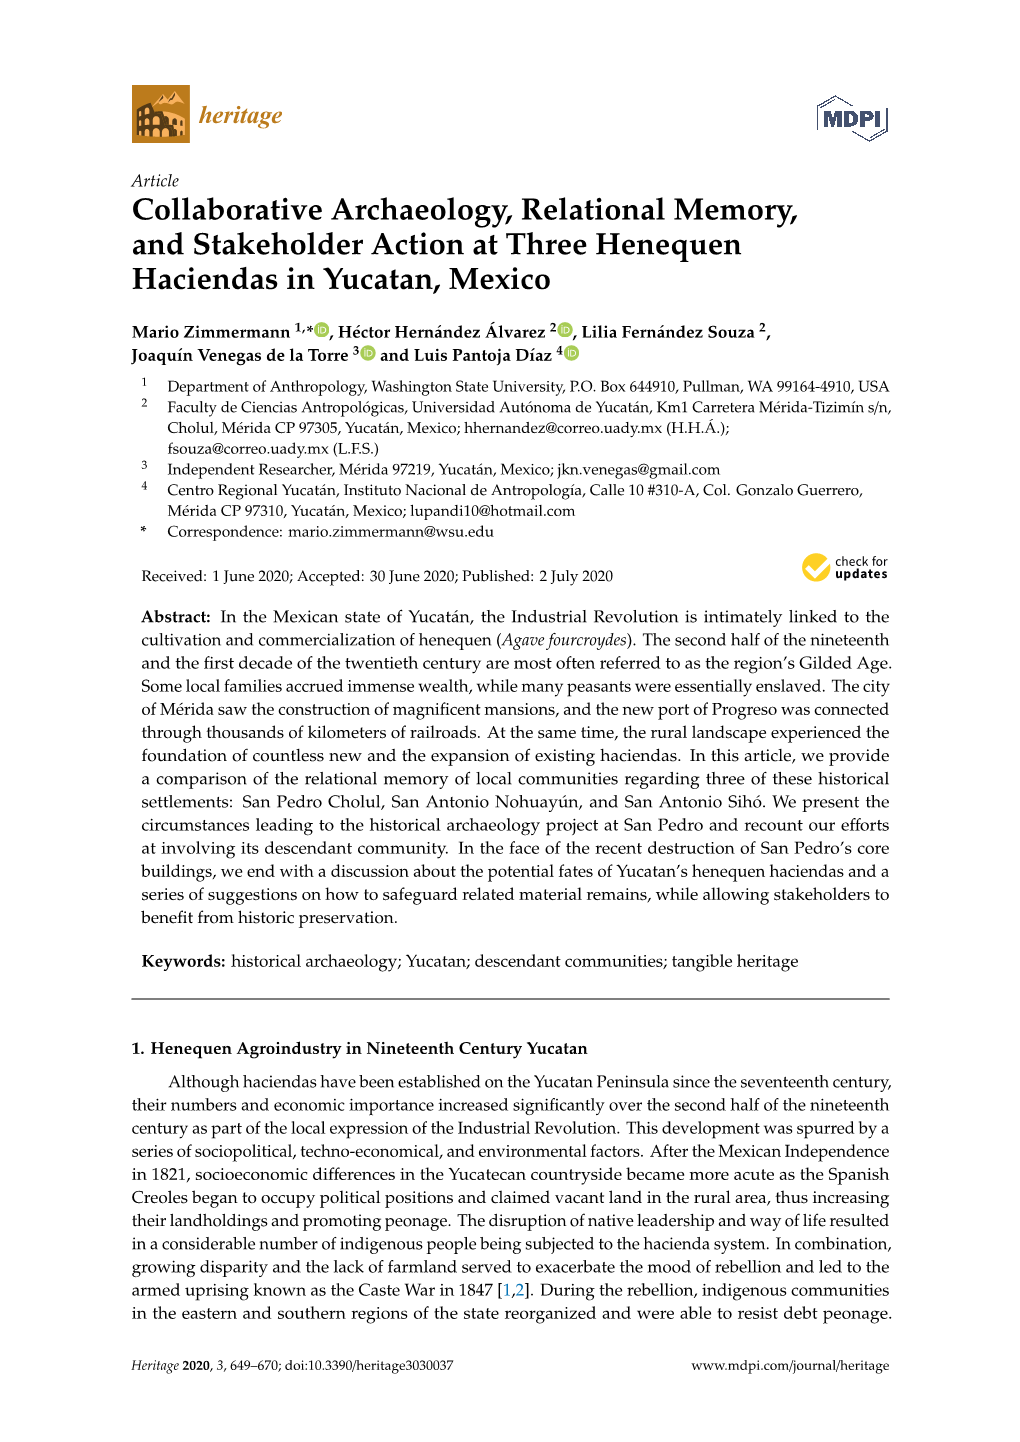 Collaborative Archaeology, Relational Memory, and Stakeholder Action at Three Henequen Haciendas in Yucatan, Mexico